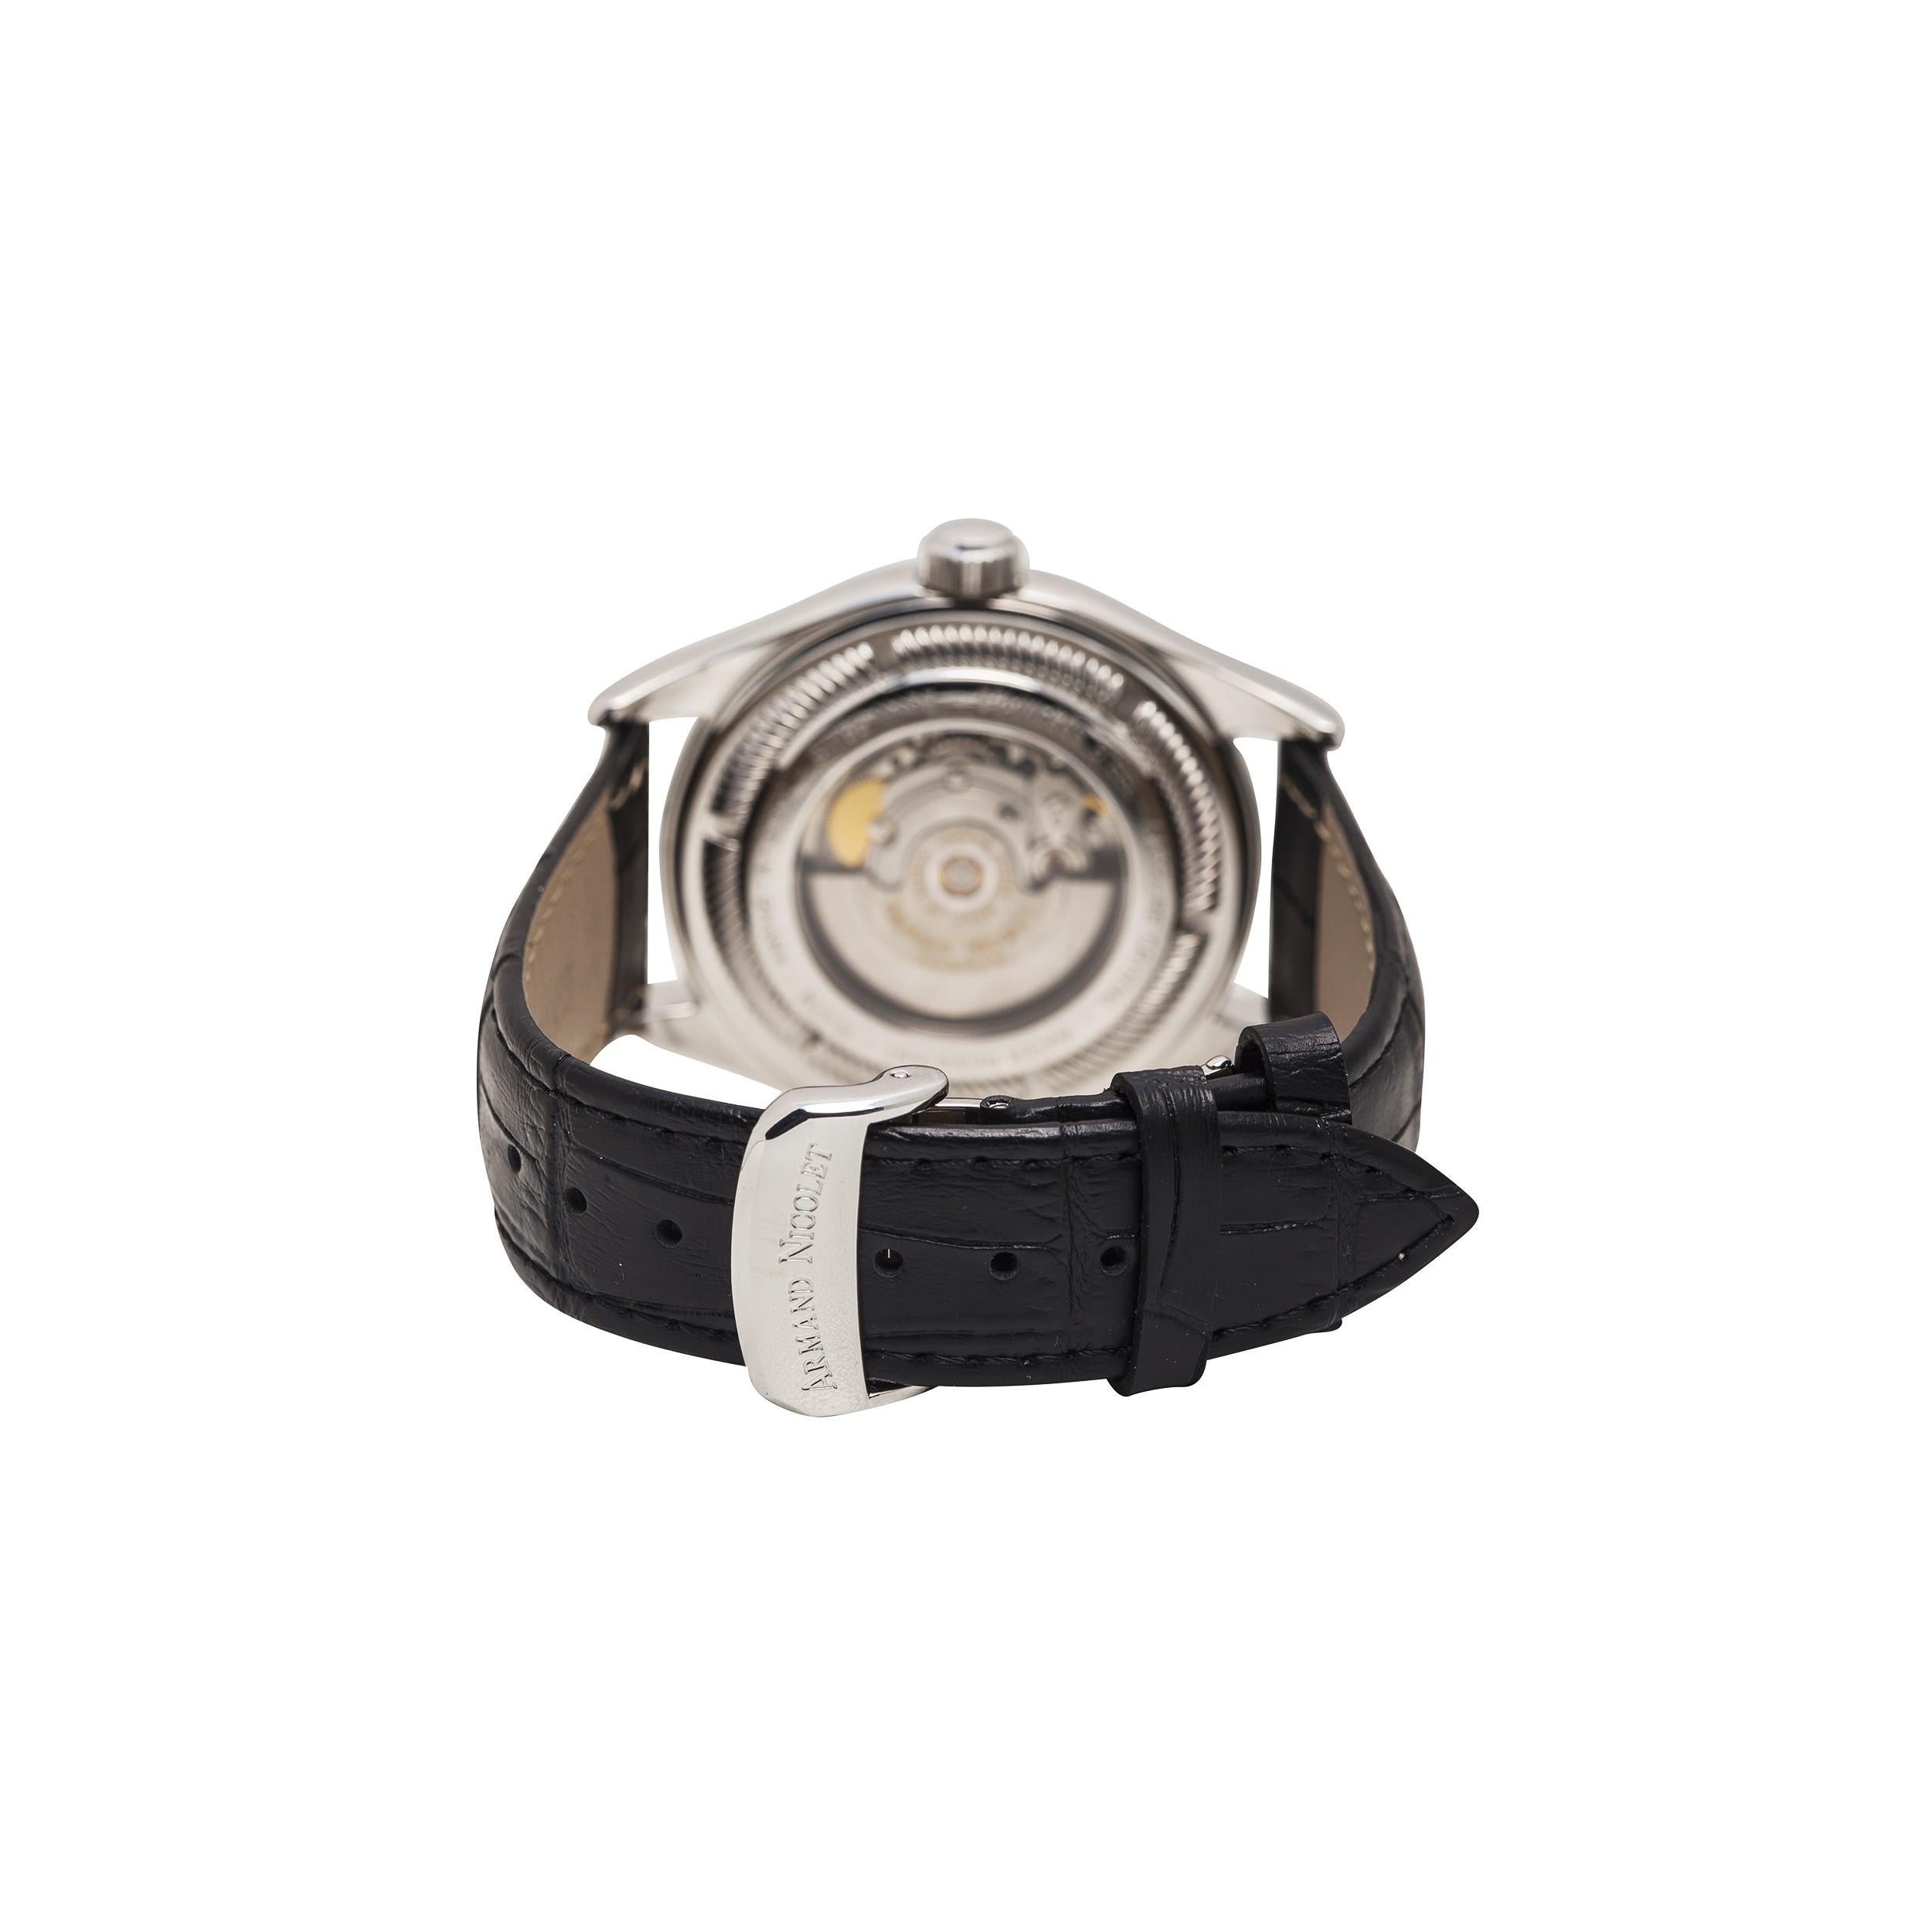 Armand Nicolet MO2 Reference #:30932. . Verified and Certified by WatchFacts. 1 year warranty offered by WatchFacts.